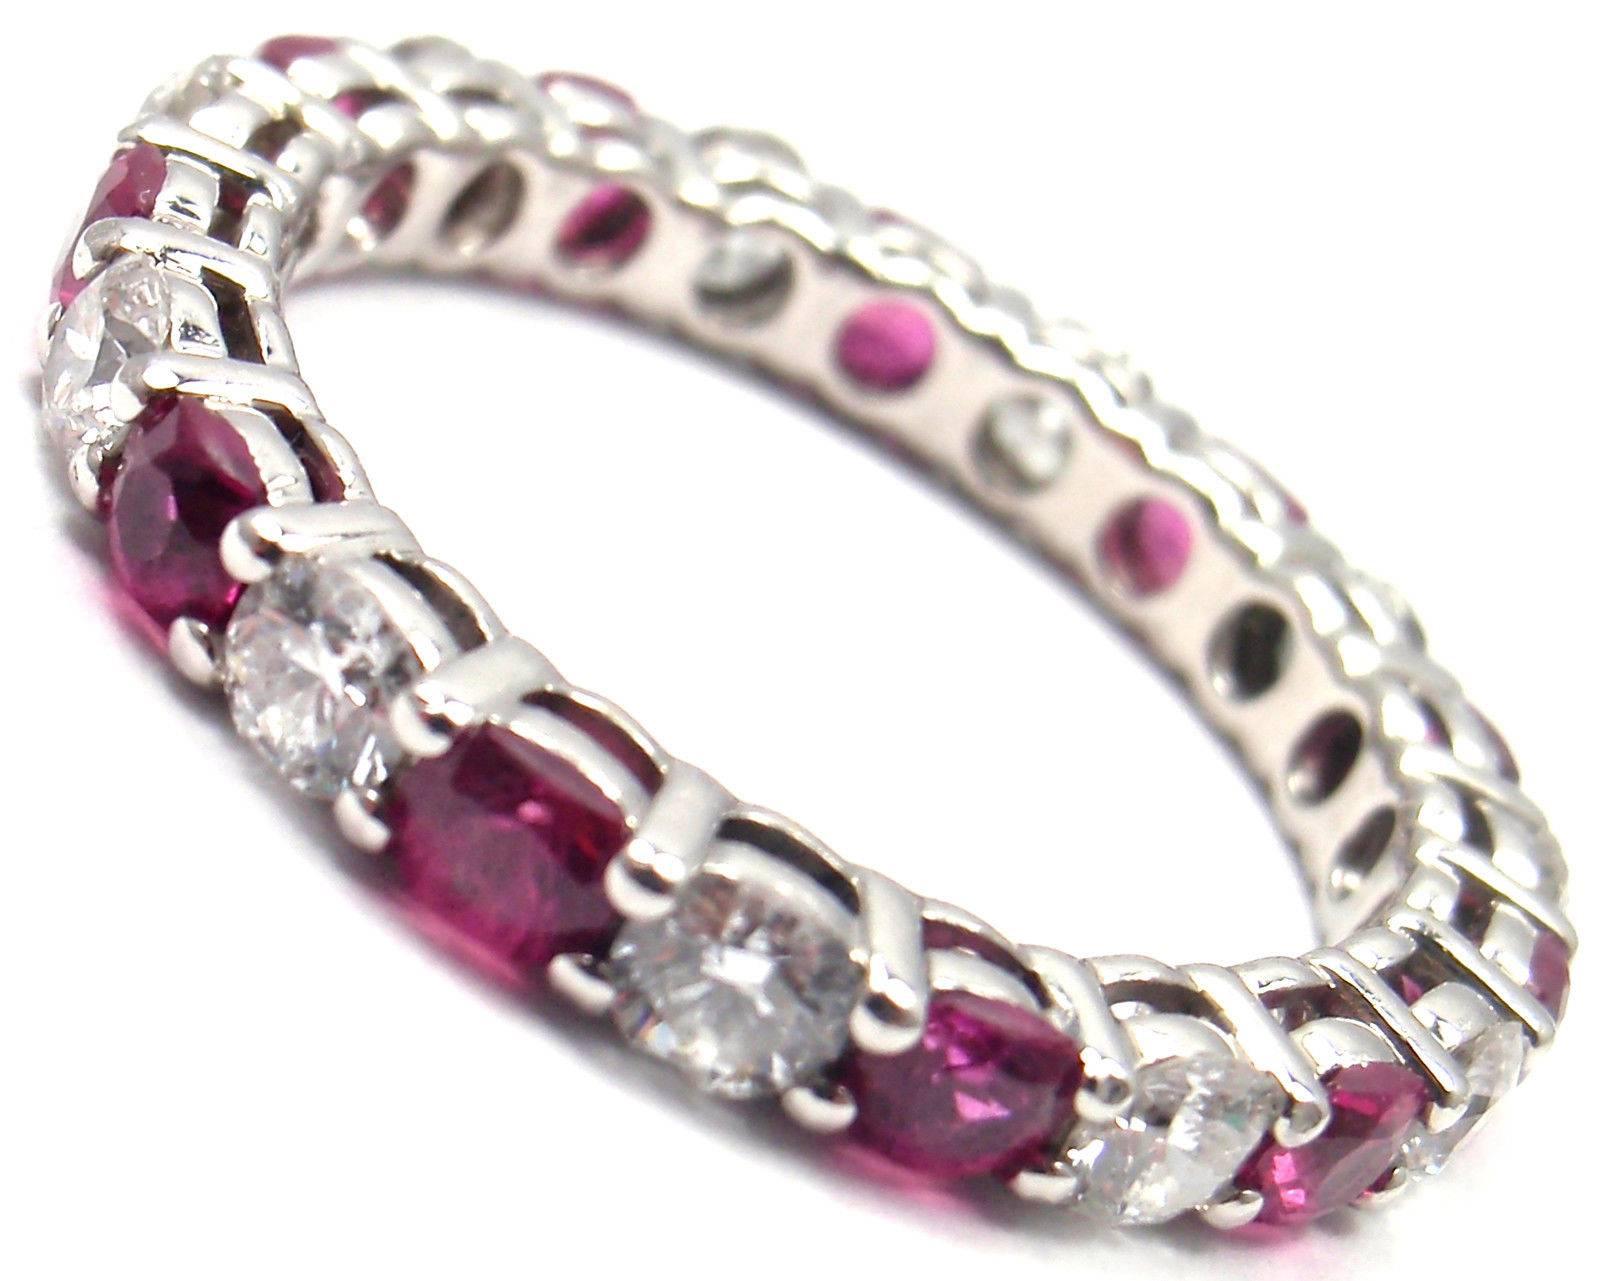 Tiffany & Co Platinum Diamond And Ruby Shared Setting Band Ring. 
With 11 round brilliant cut diamonds VS1 clarity, E color total weight approx. .96ct
11 round rubies total weight approx. 1.20ct

Measurements:  
Ring Size: 6
Weight: 3.3 grams
Band